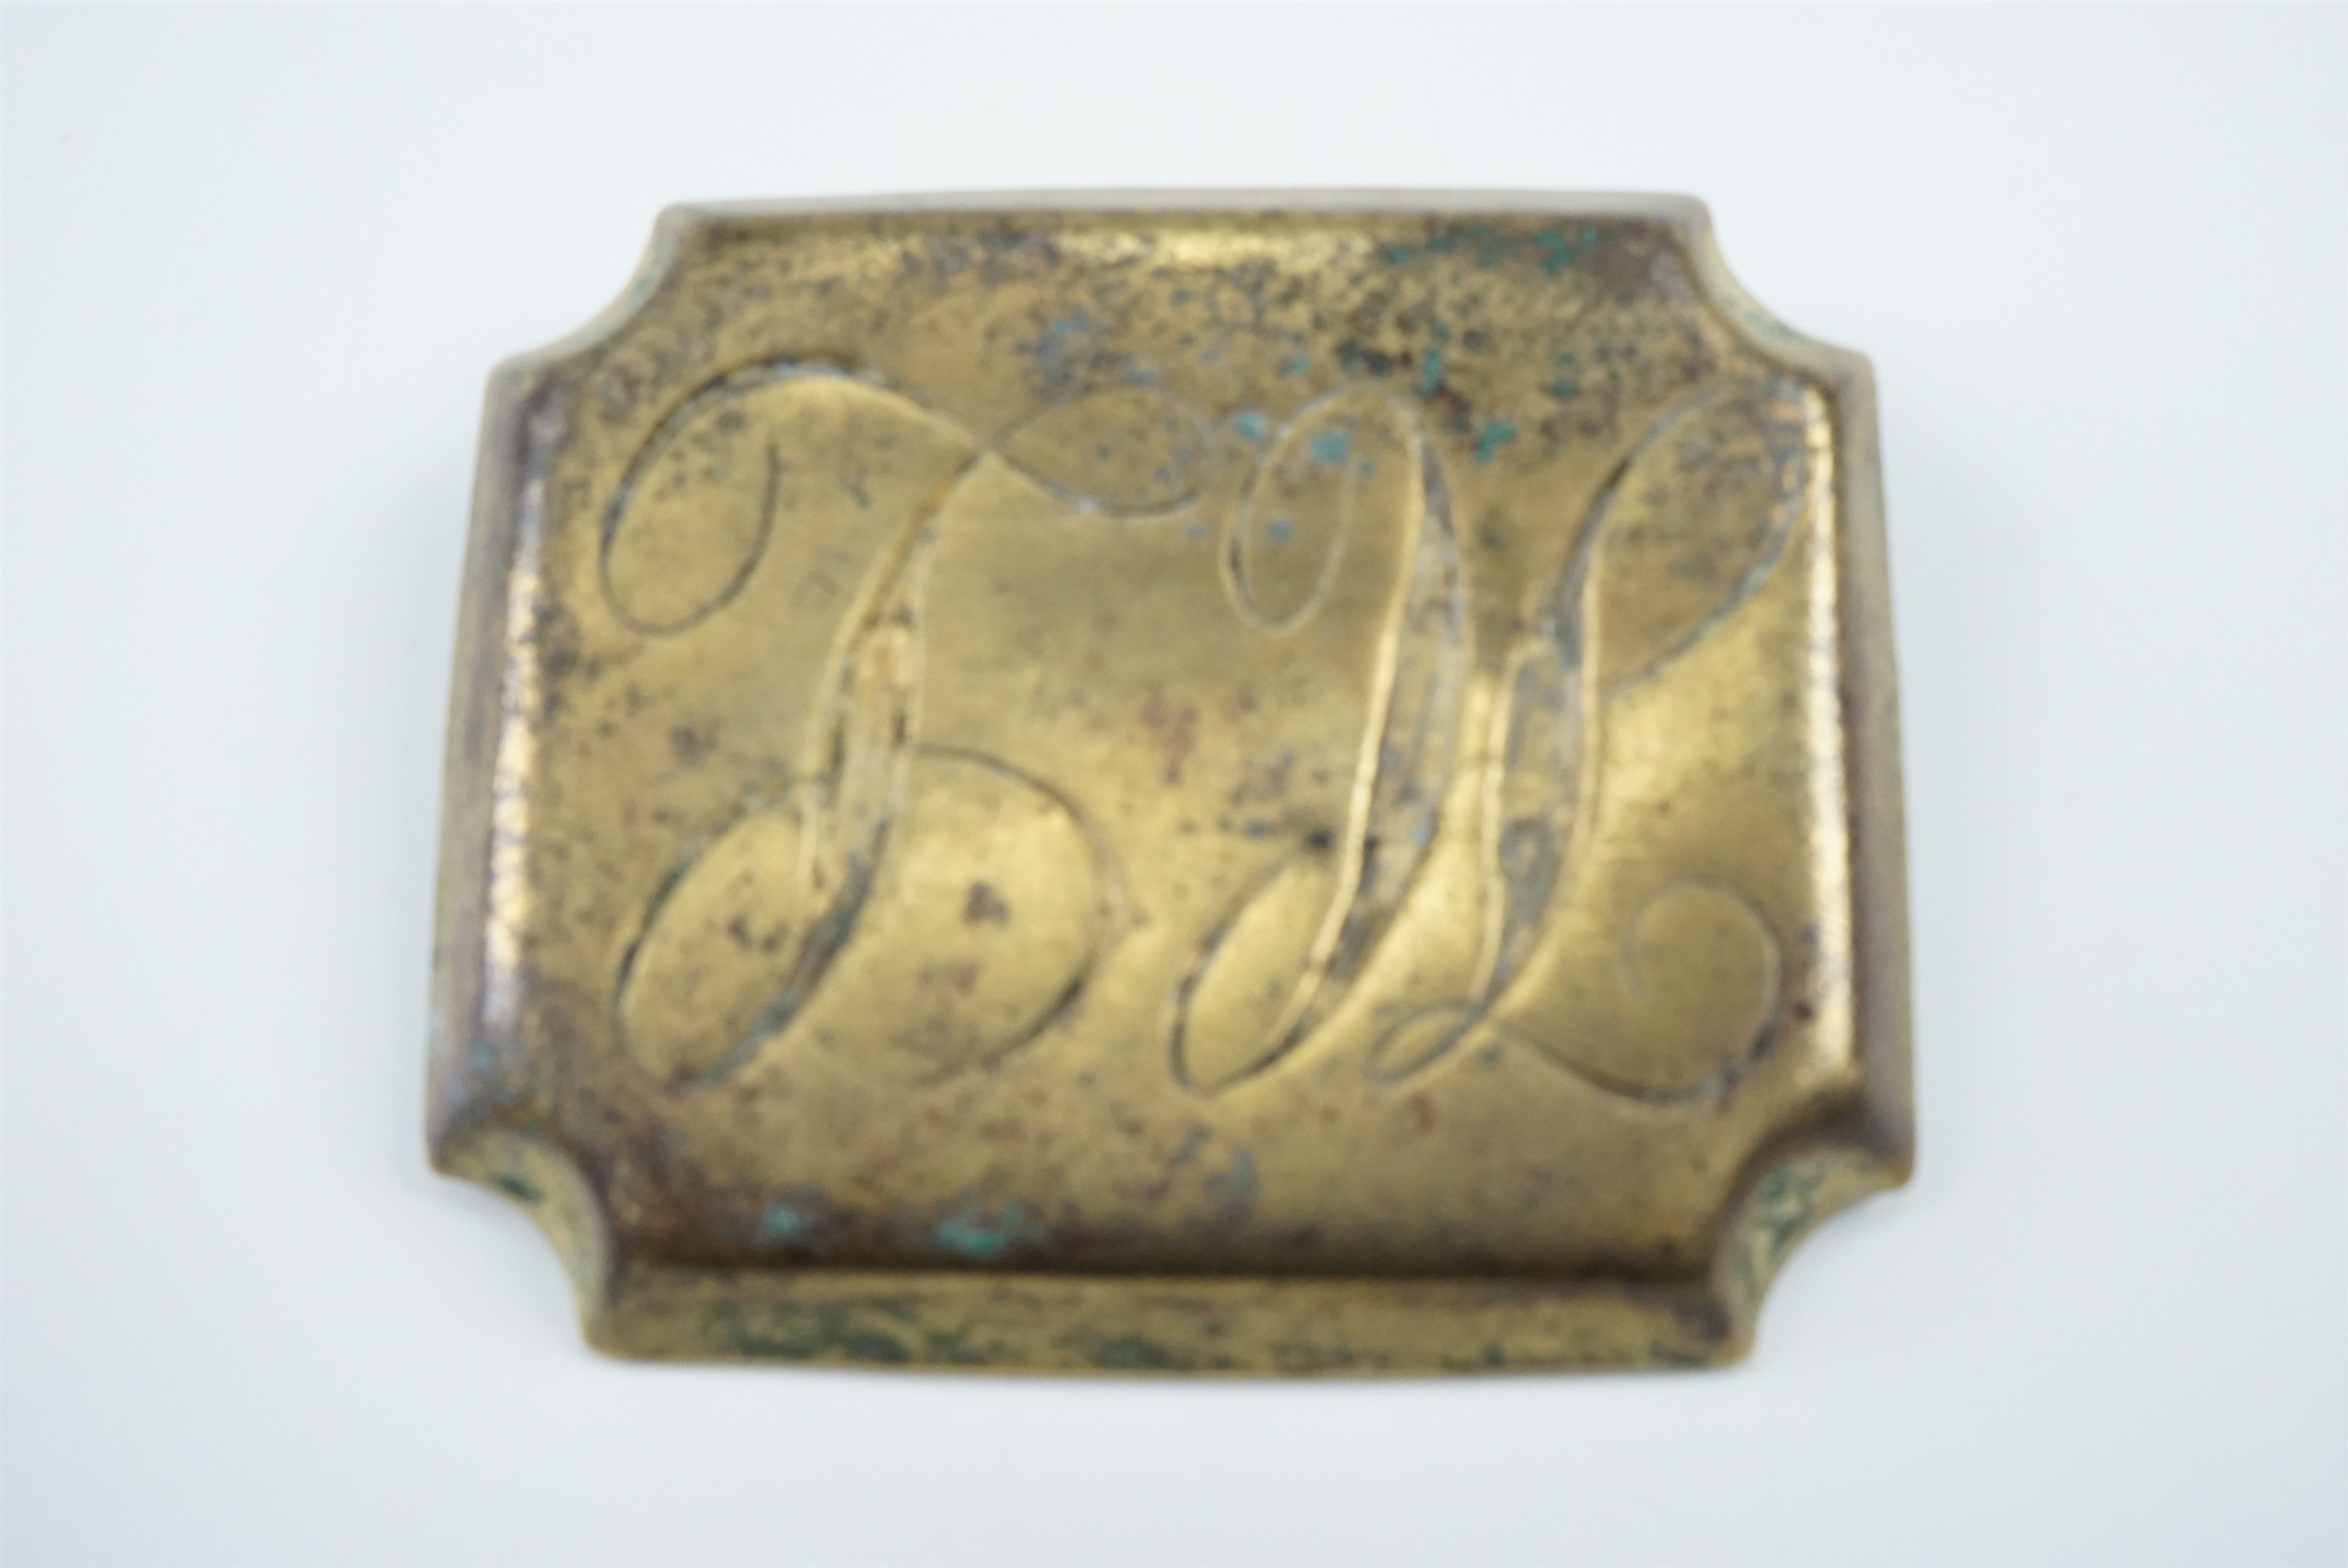 A 19th Century engraved brass saddlery or luggage plaque, 7 cm x 6 cm - Image 2 of 2